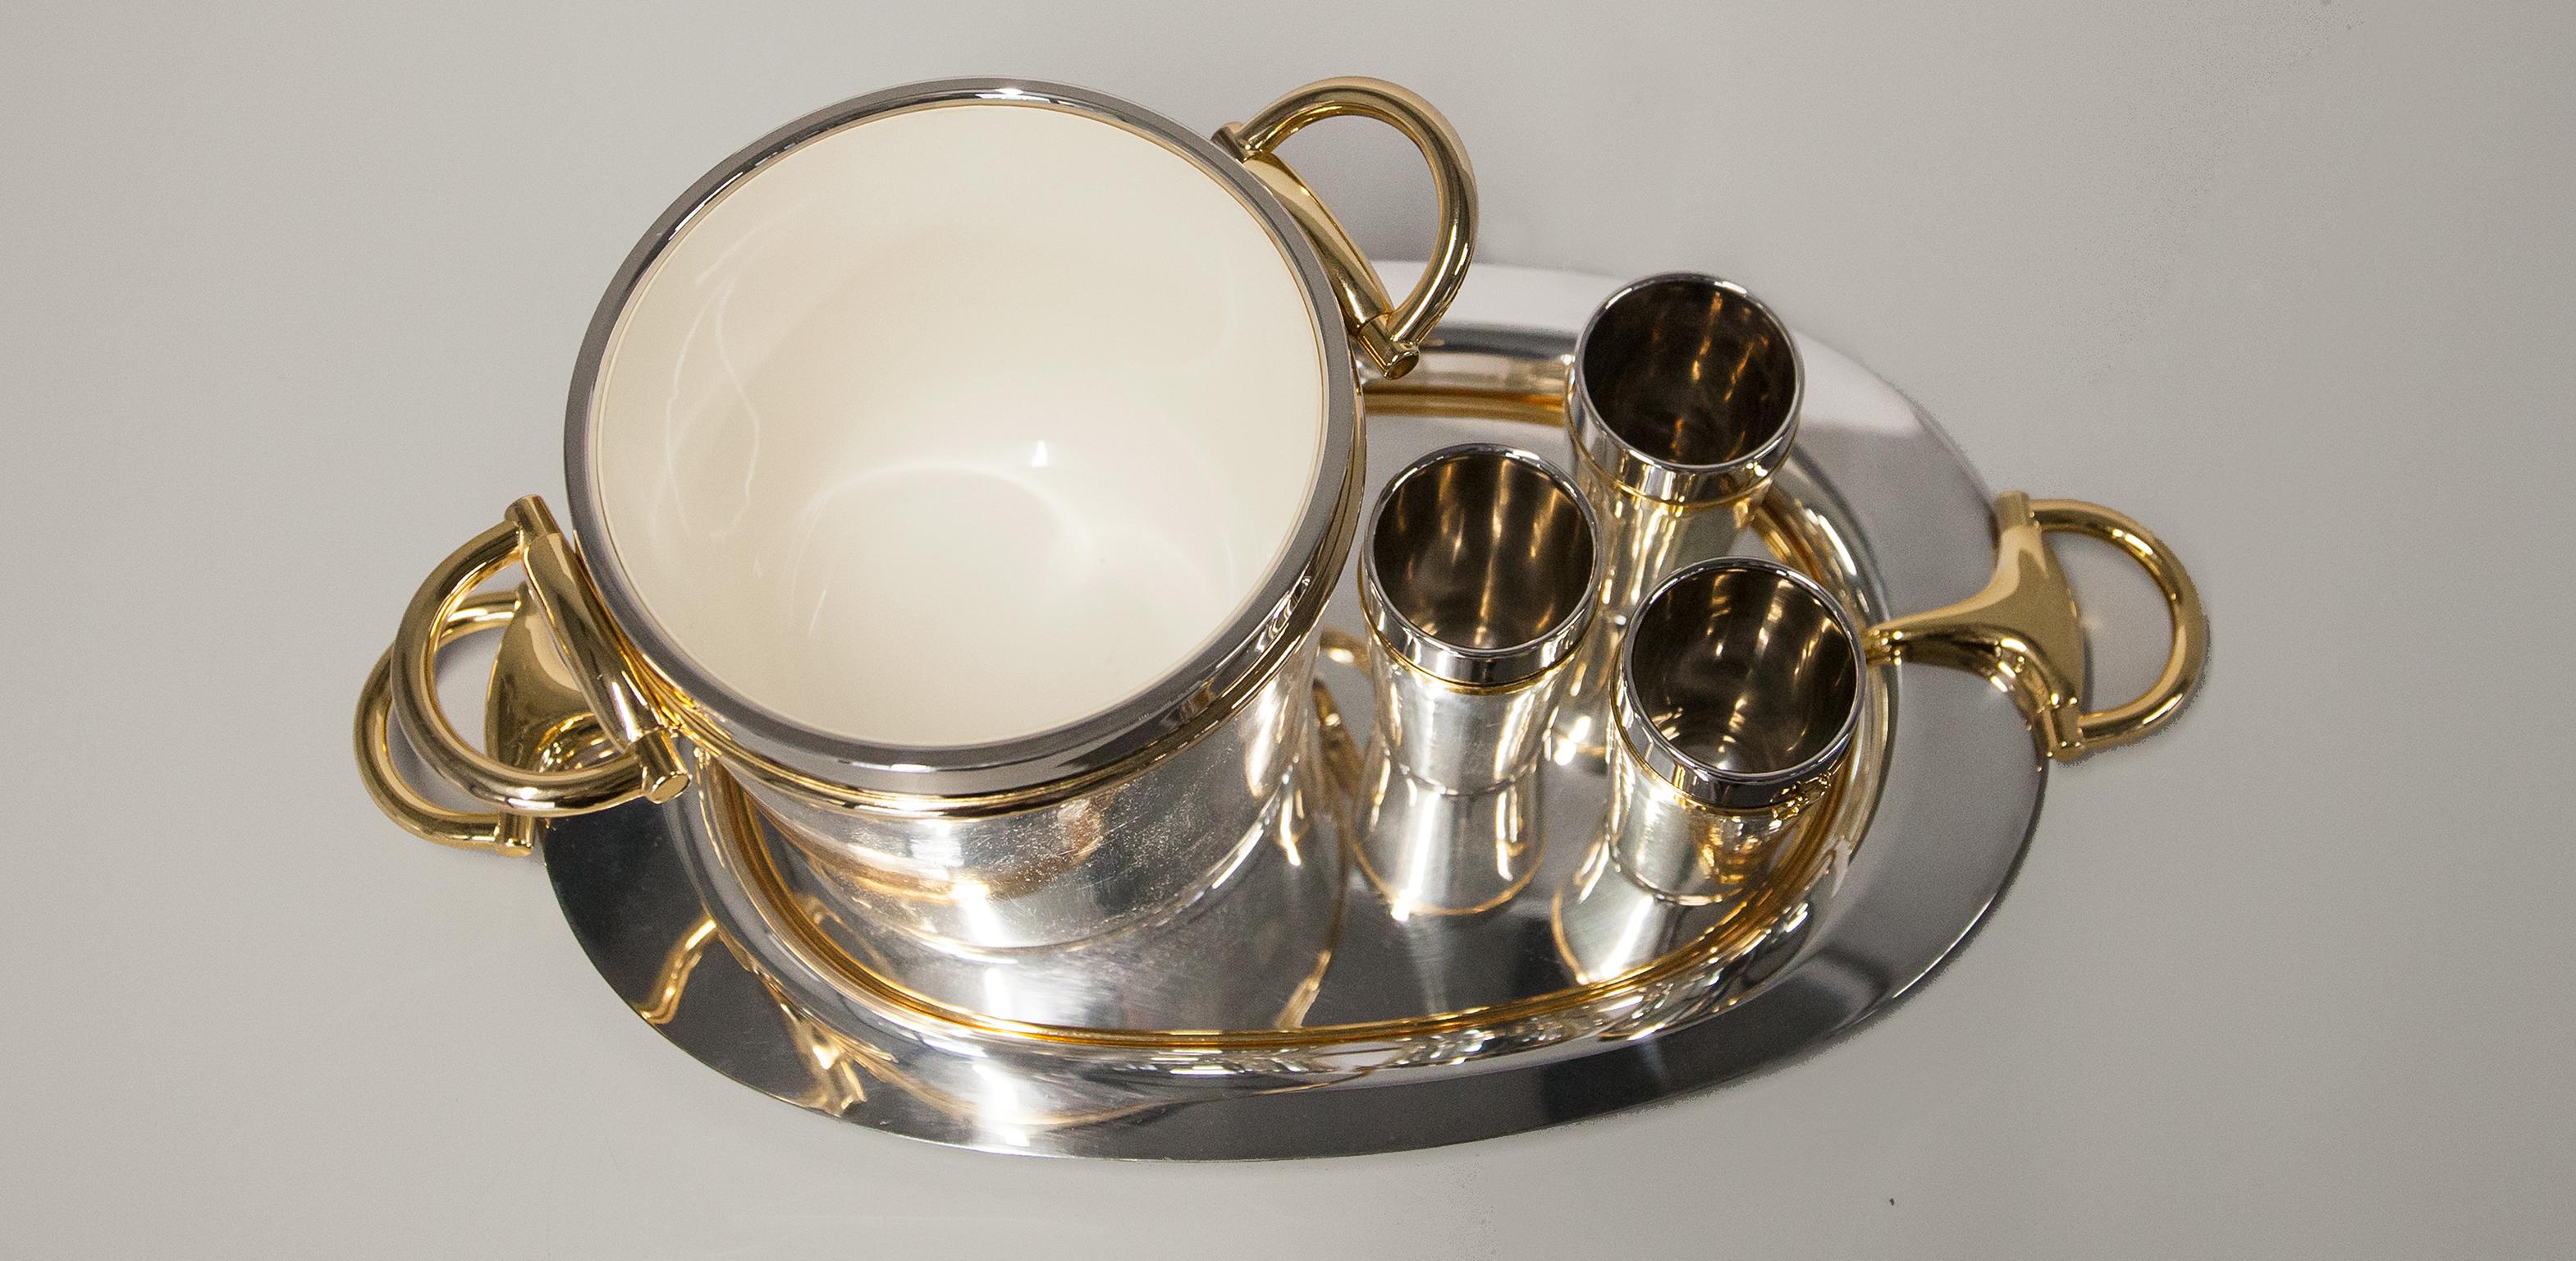 Very rare and special vintage Gucci bar set consisting of a monumental oval tray, three mugs and an elegant large wine cooler. Everything made of silver and gold plated brass and designed in the typical Gucci stirrup design, and of course all pieces